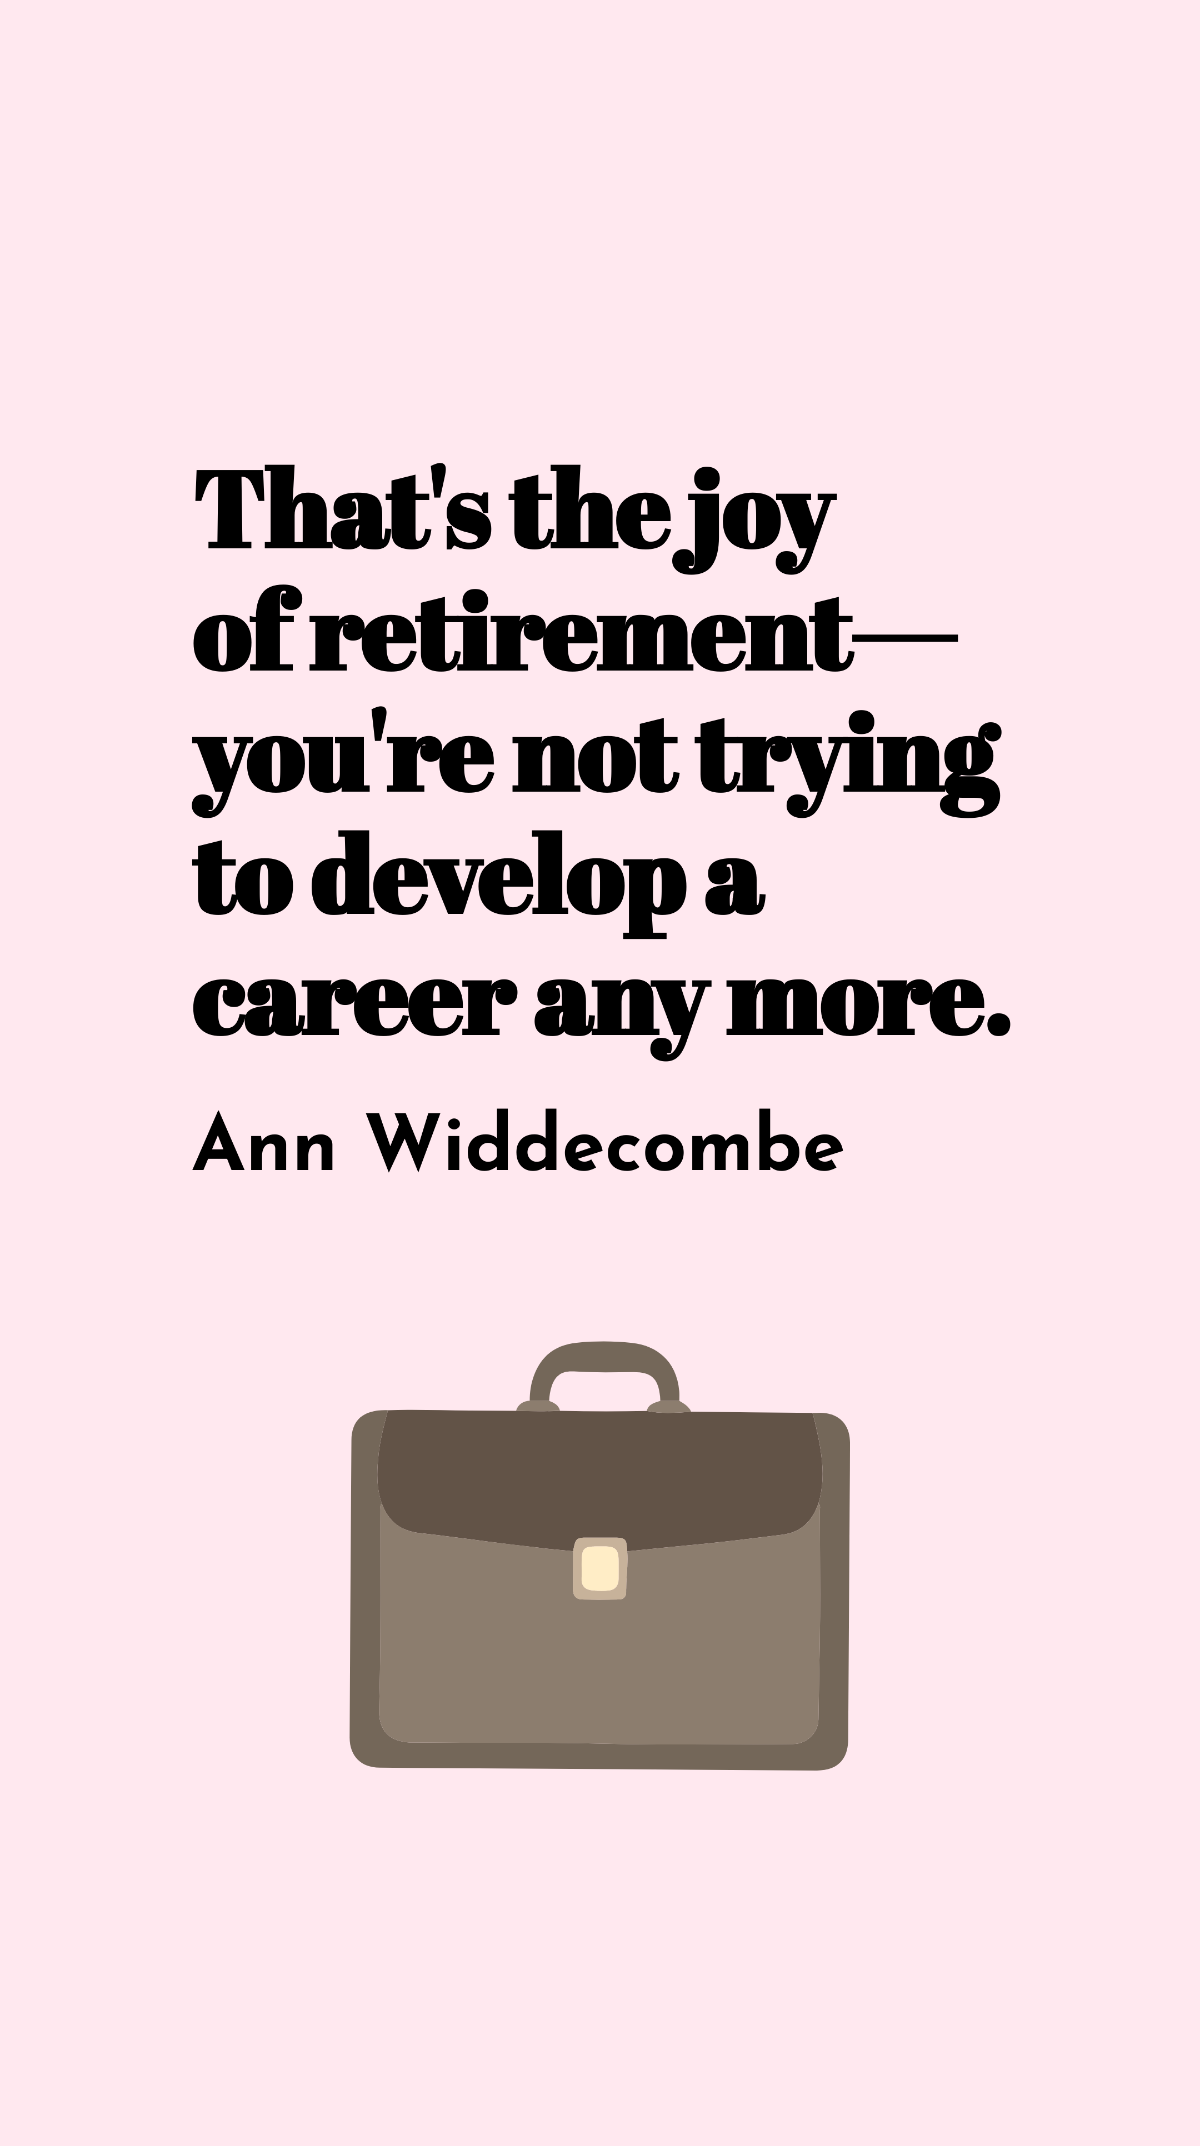 Ann Widdecombe - That's the joy of retirement - you're not trying to develop a career any more. Template